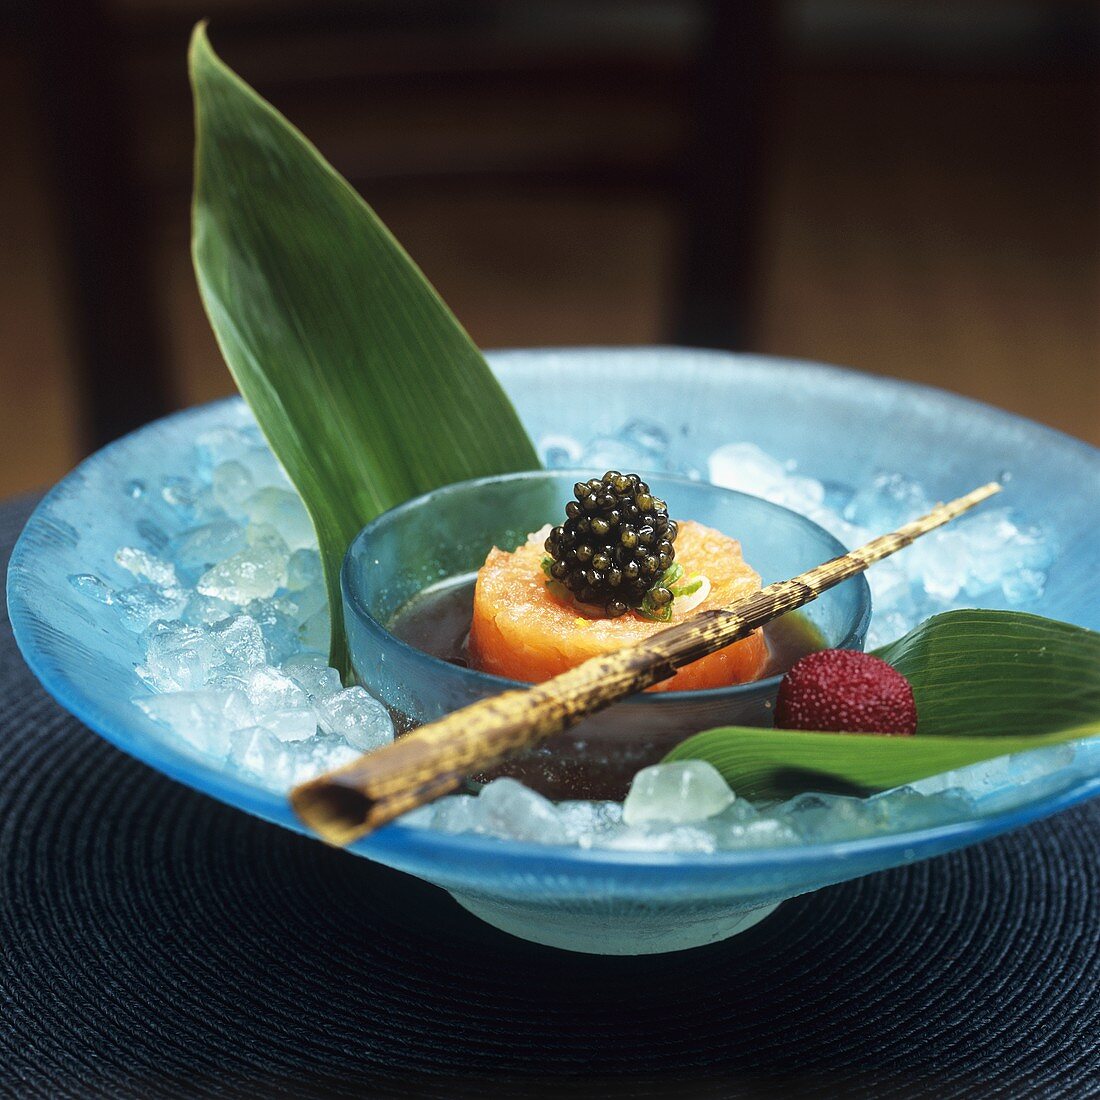 Salmon tartare with caviar in a small bowl, bamboo leaves